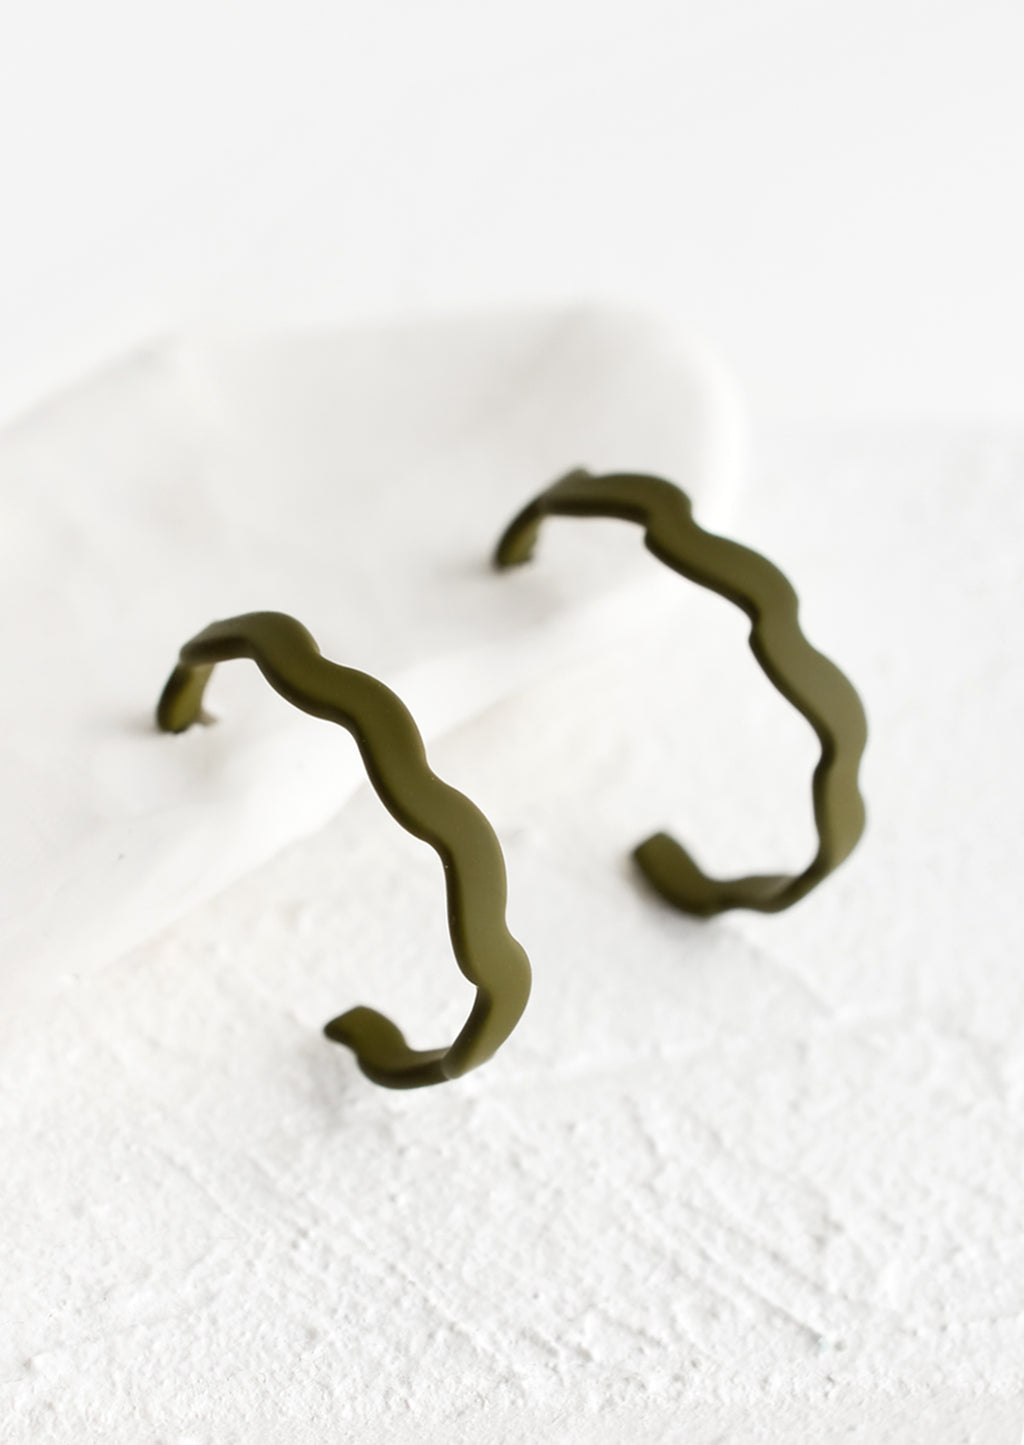 Army: A pair of hoop earrings in matte olive with wavy shape.